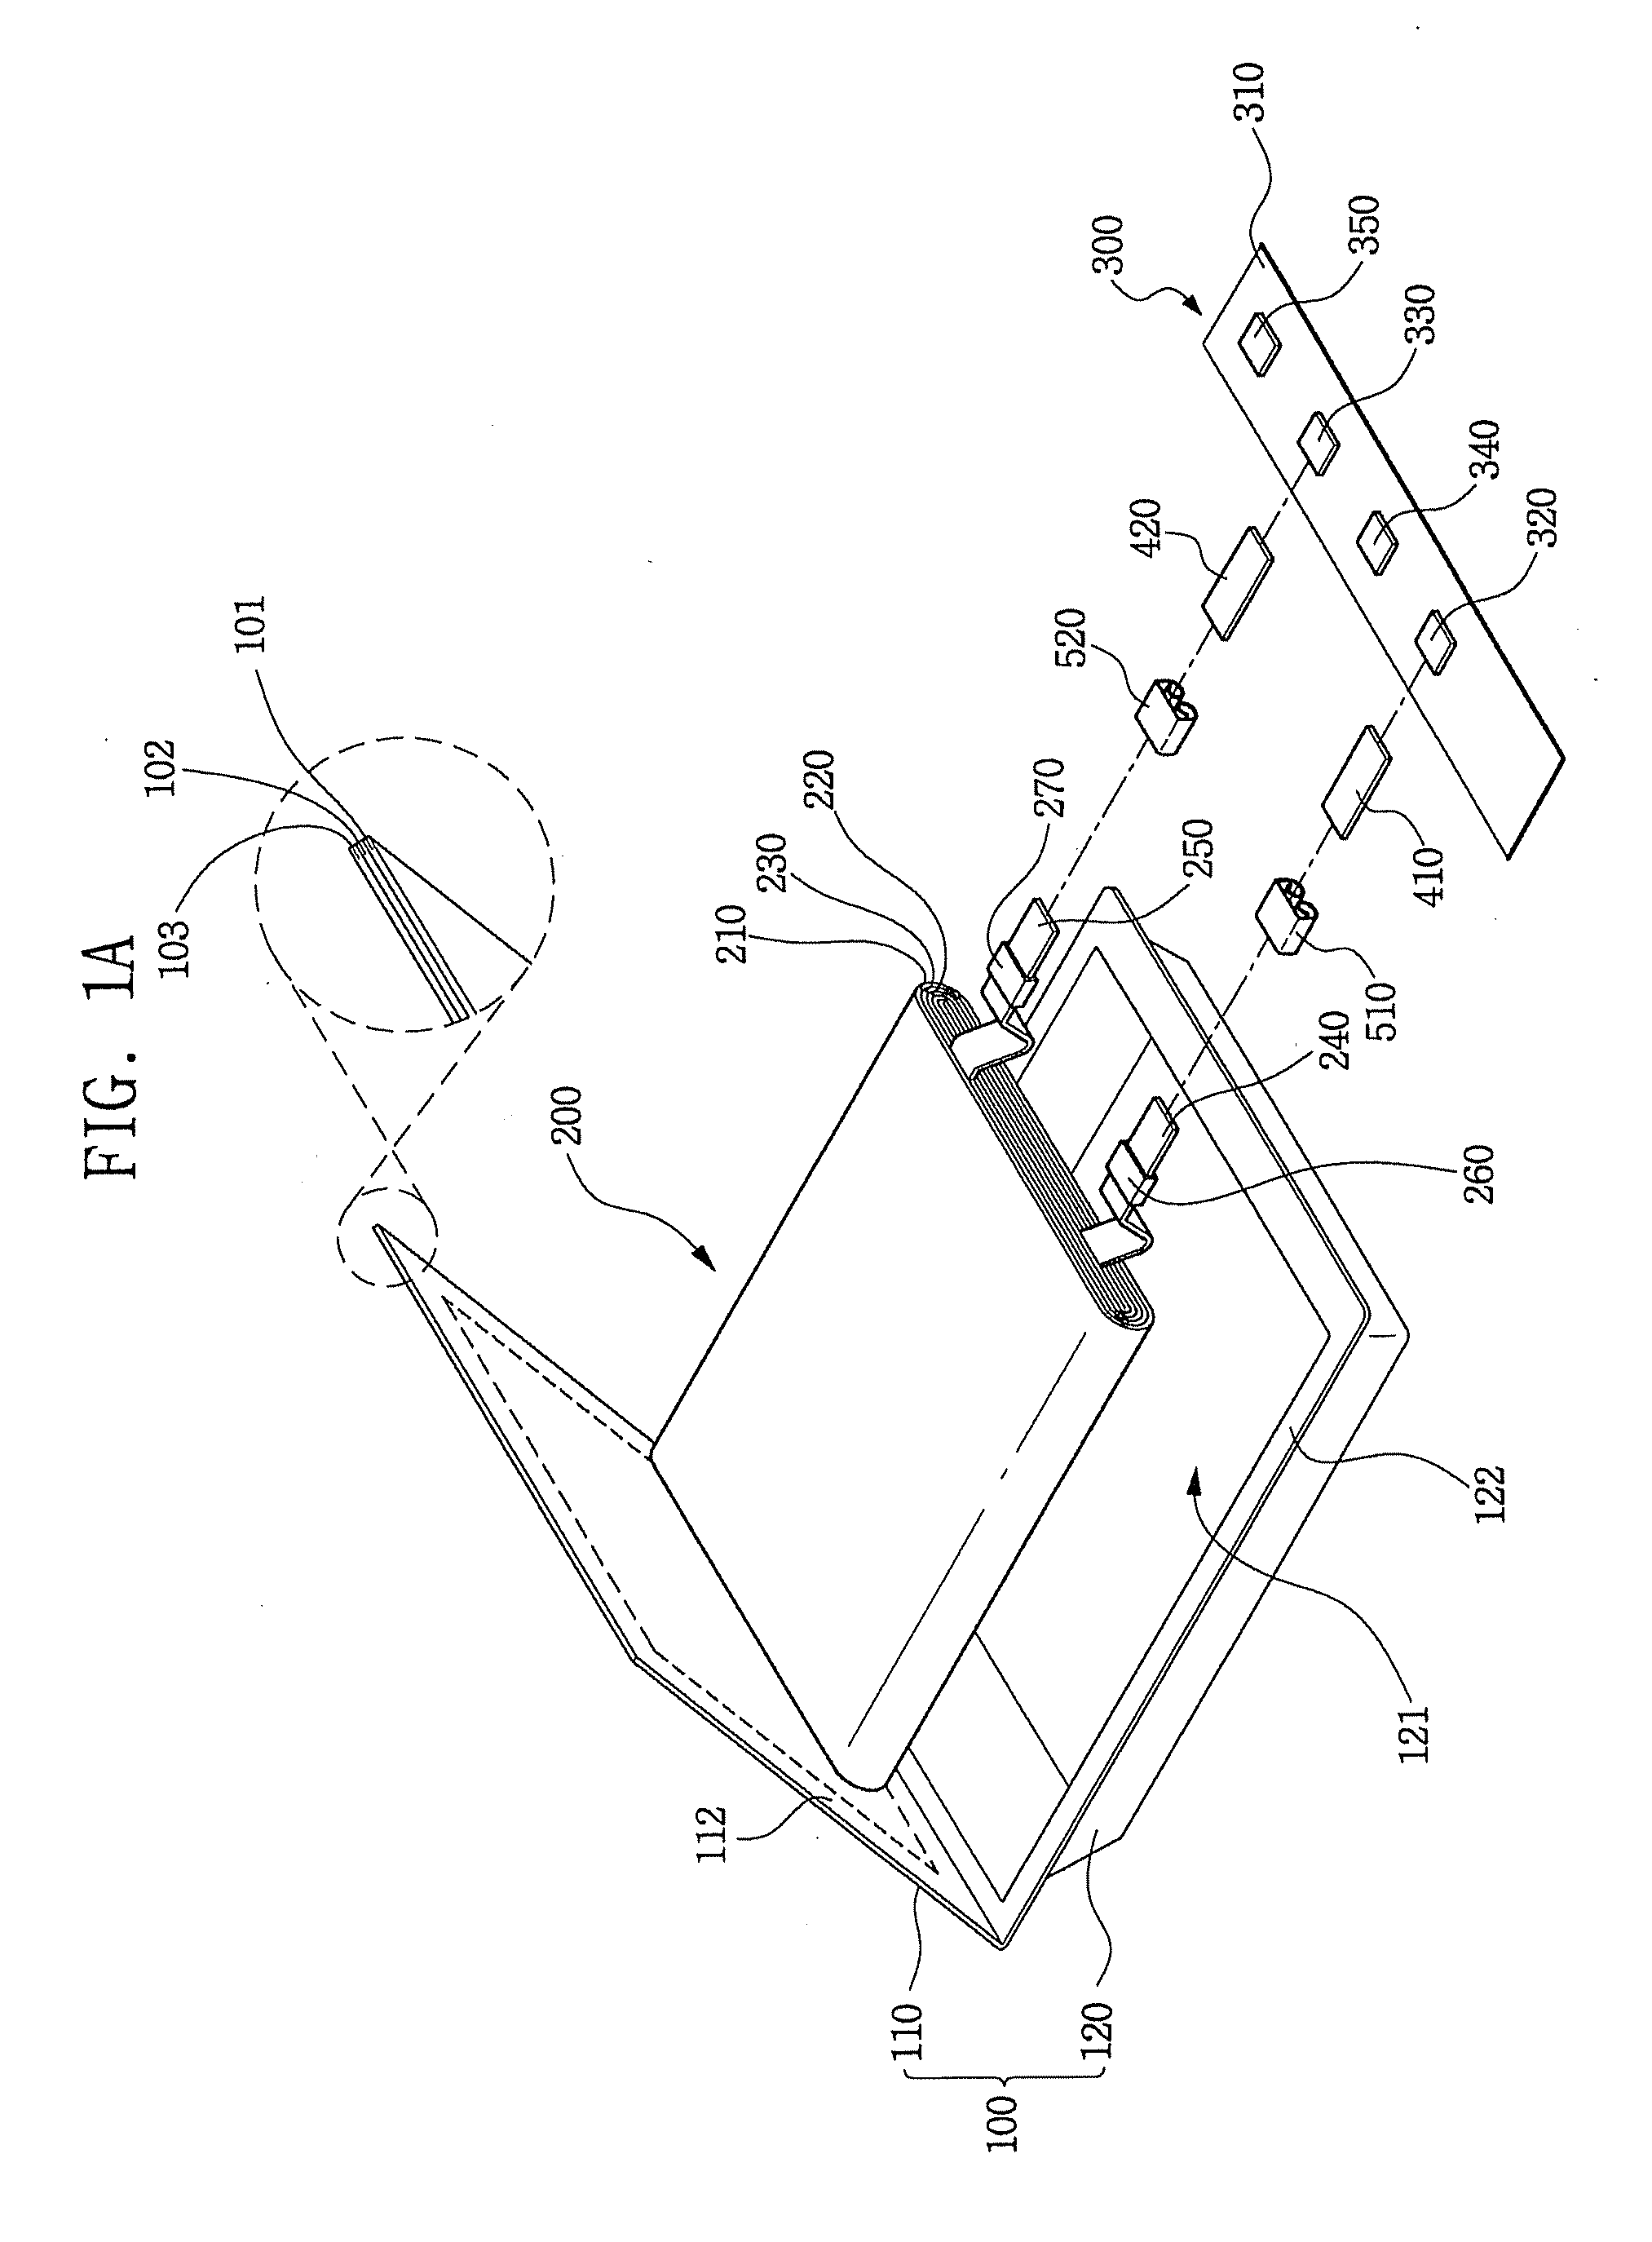 Squeeze pin and secondary battery using the same